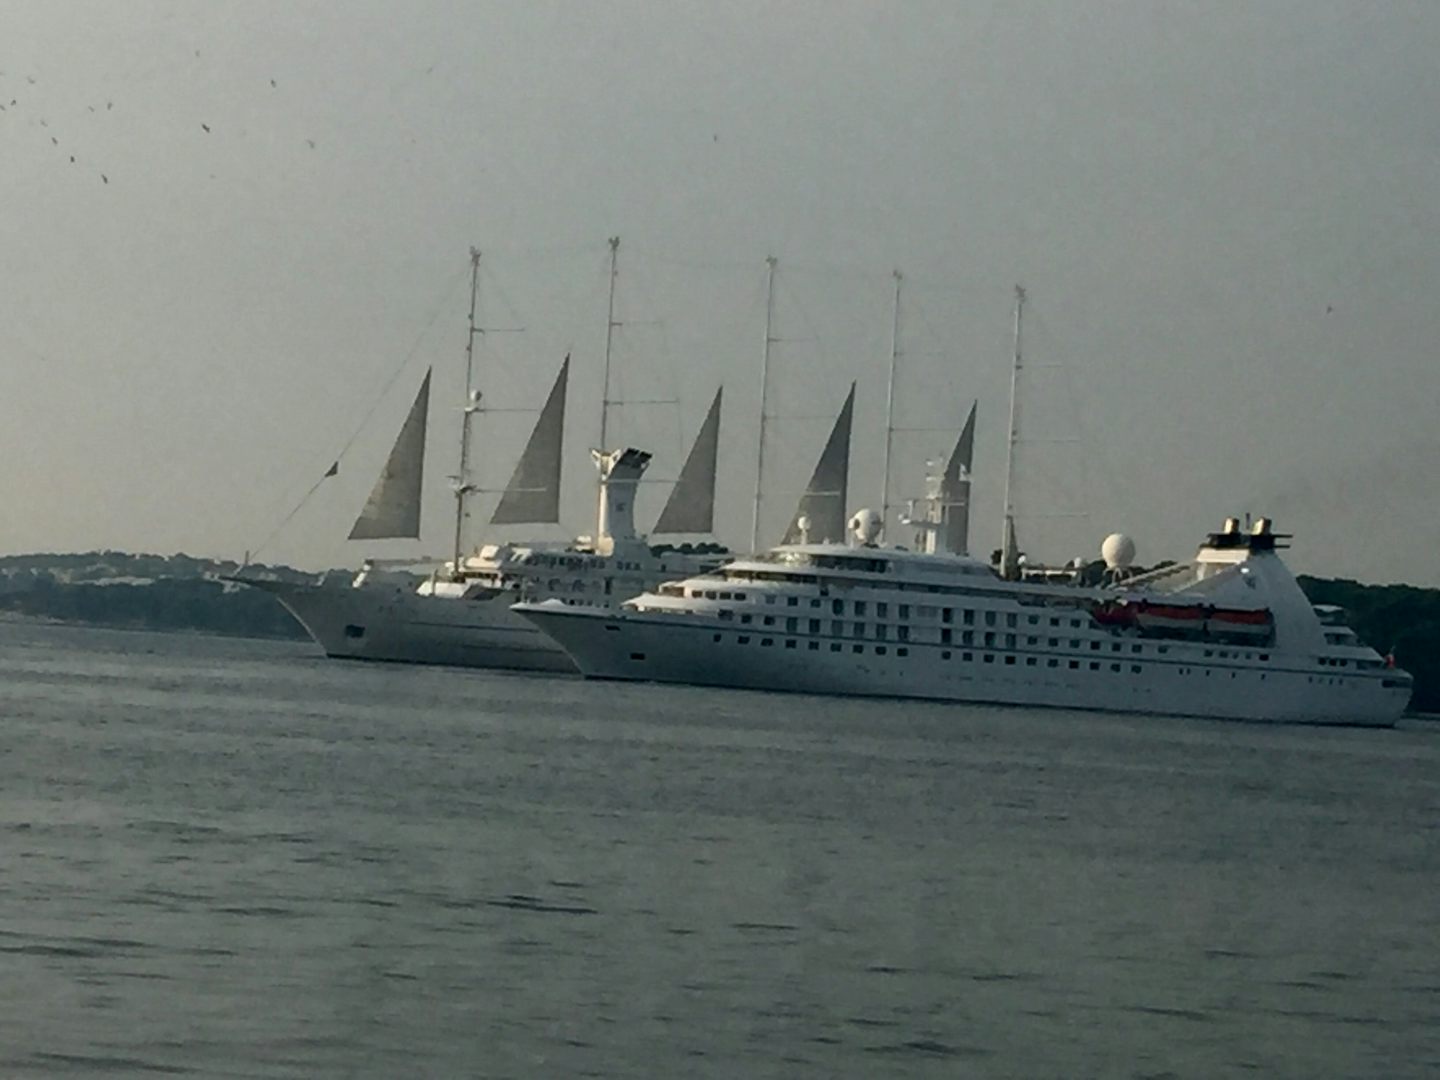 The Windsurf behind her sister ship the Star Pride in a rare meeting in por